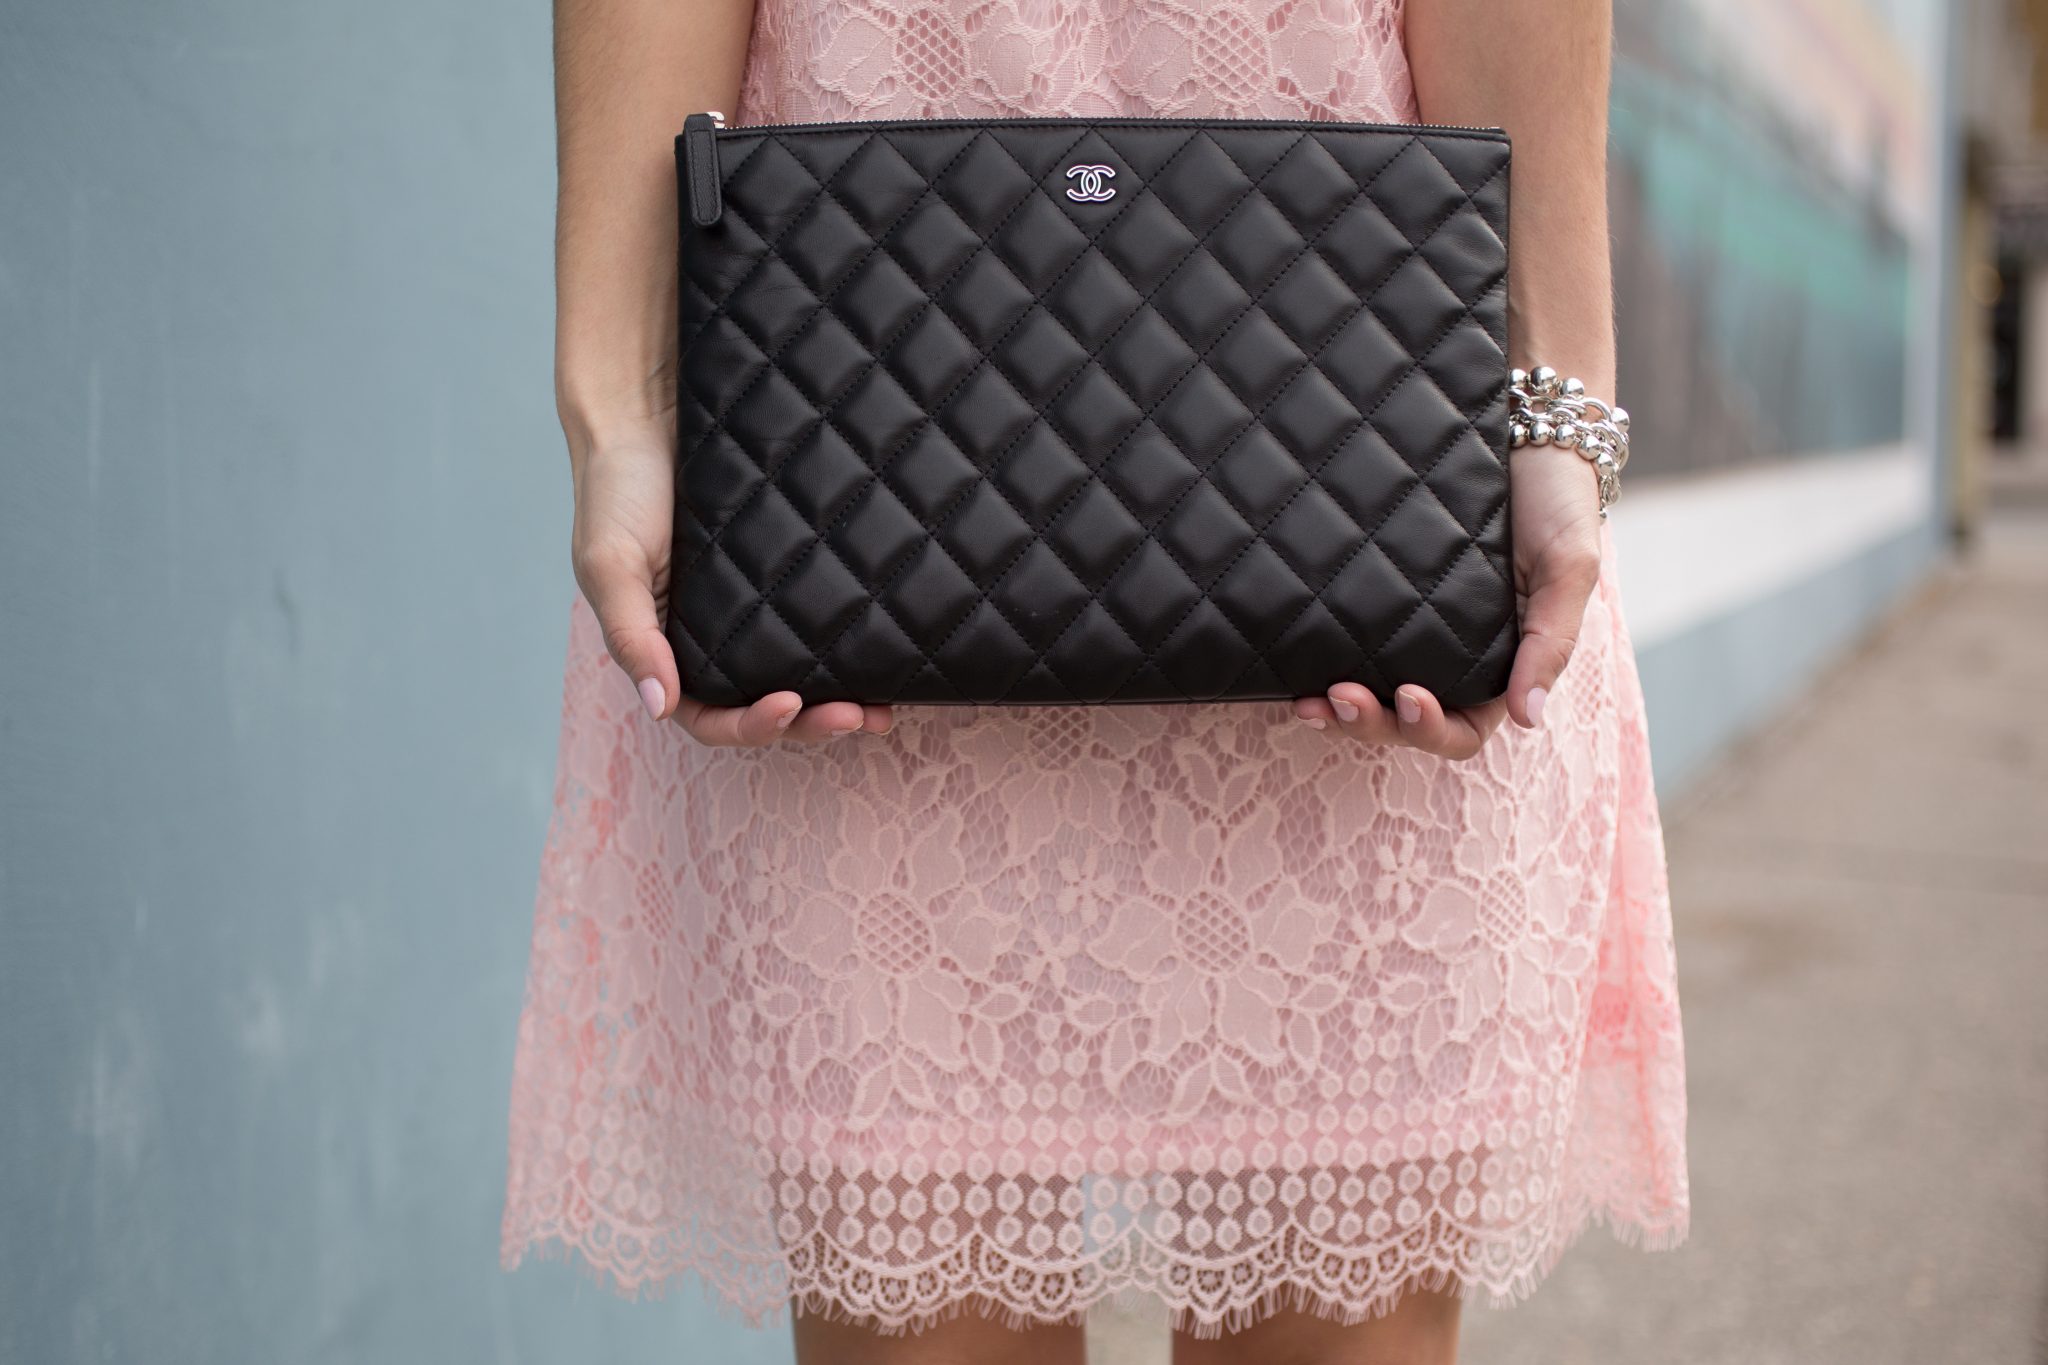 Pink lace off the shoulder dress from Suzy Shier, Chanel black quilted clutch, black suede lace up pumps, Ray-Ban Aviators